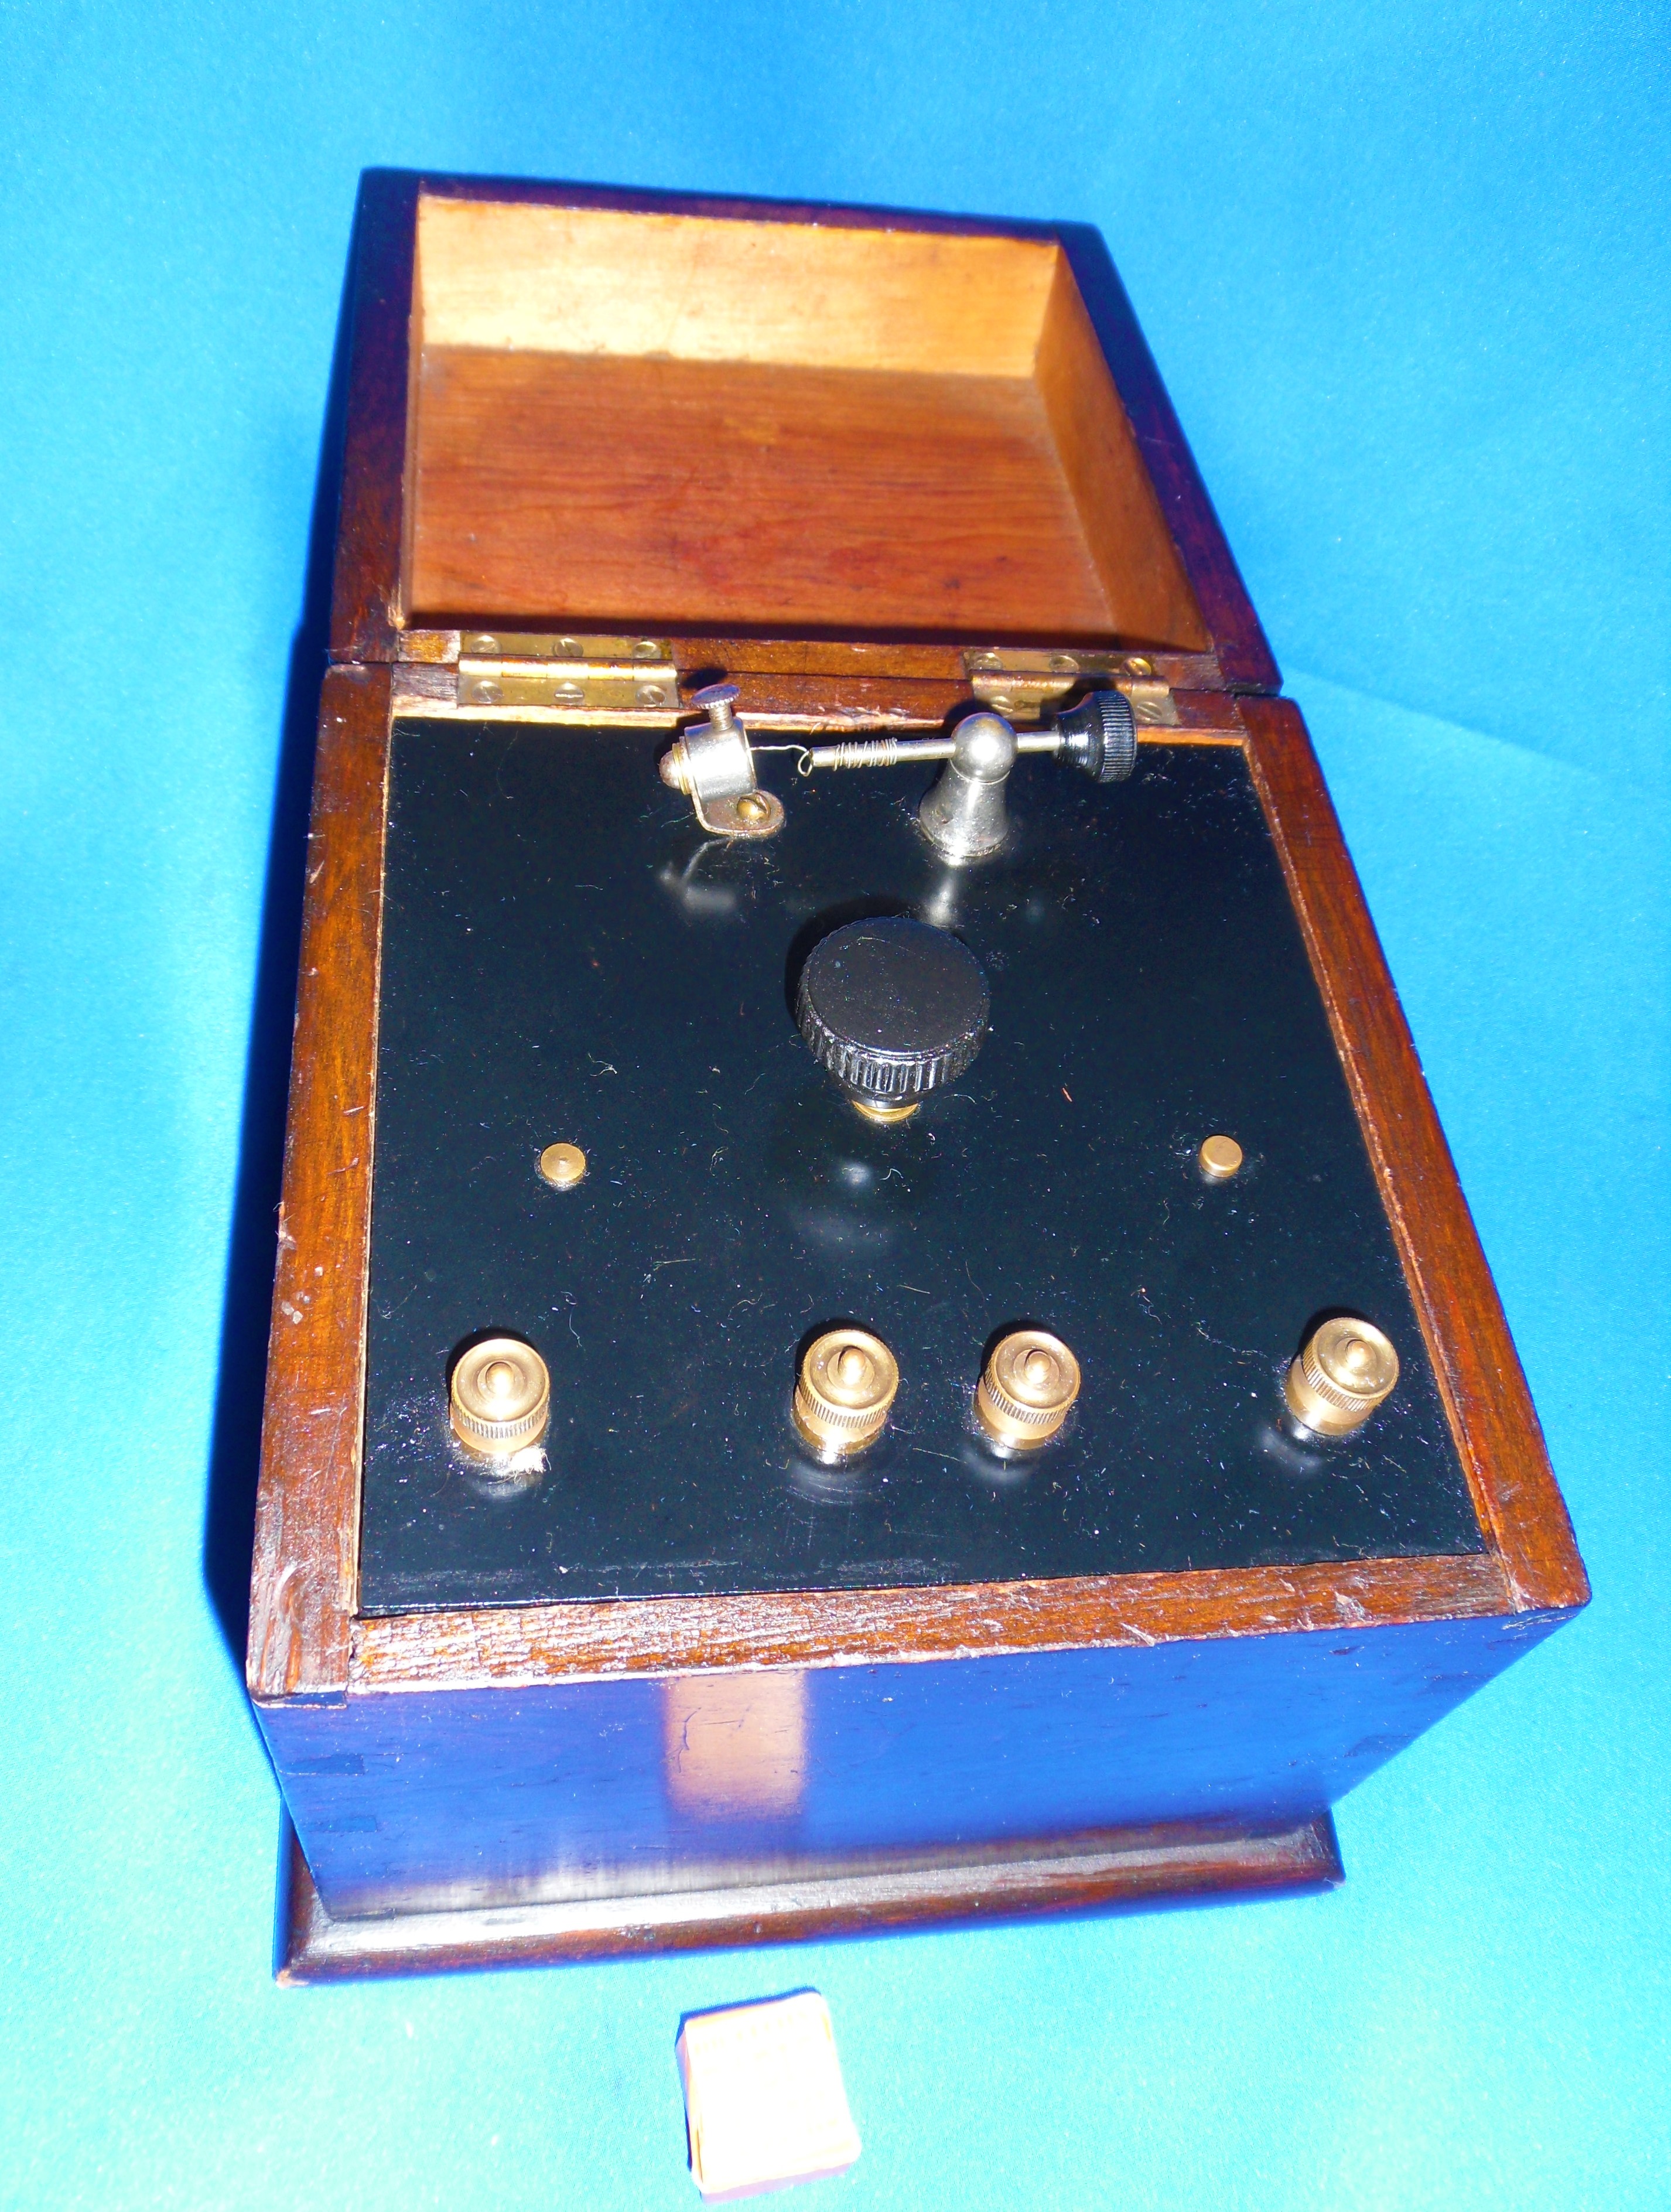 Antique Crystal Radio Believed a "The Post Office Box" Boxed Dr CECIL Crystal